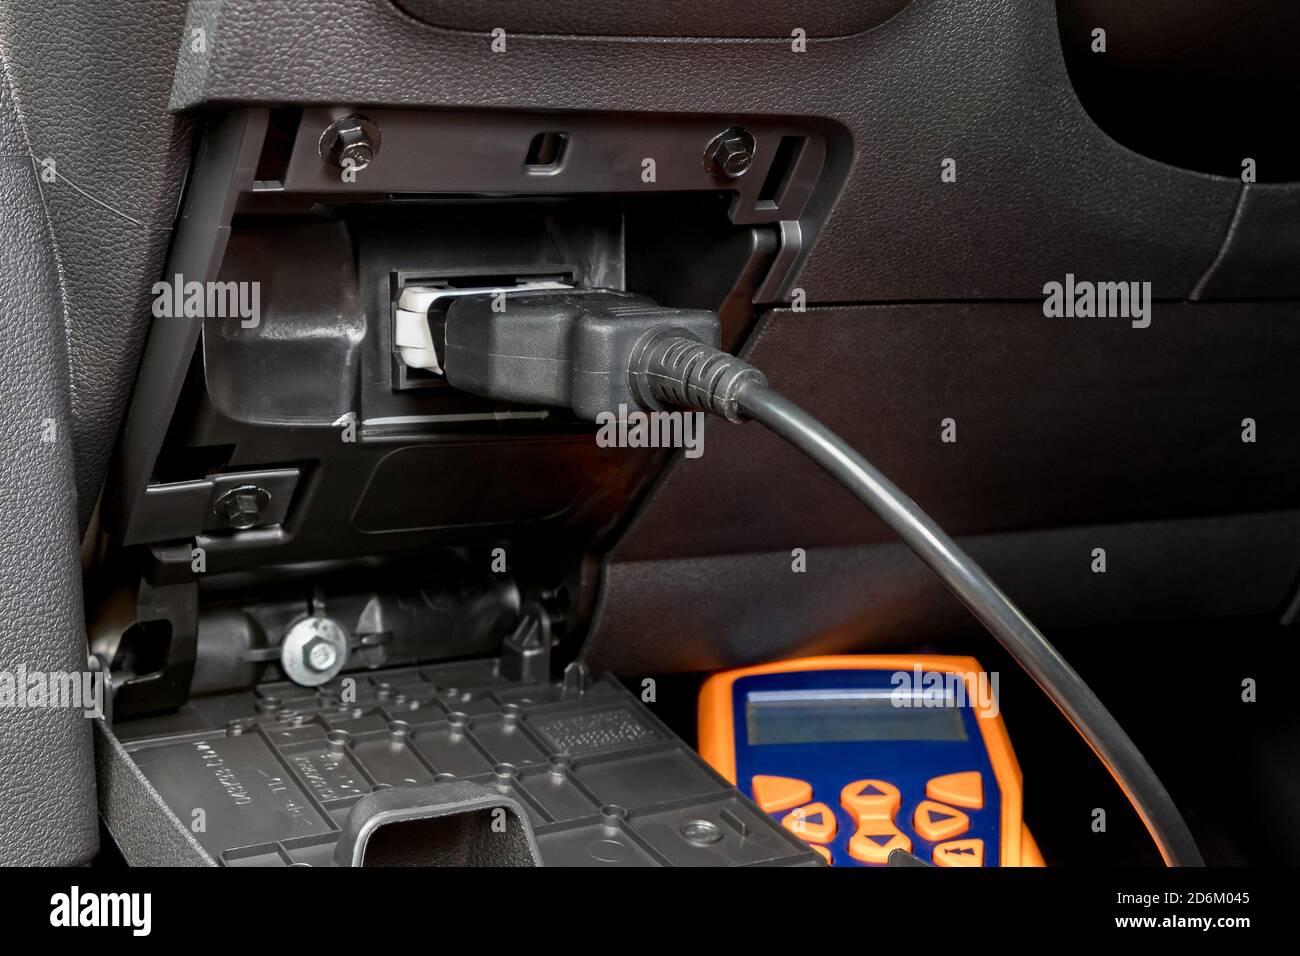 Engine scan tool plugged into car computer connection. Concept of automotive repair, maintenance, service and vehicle check engine light. Stock Photo